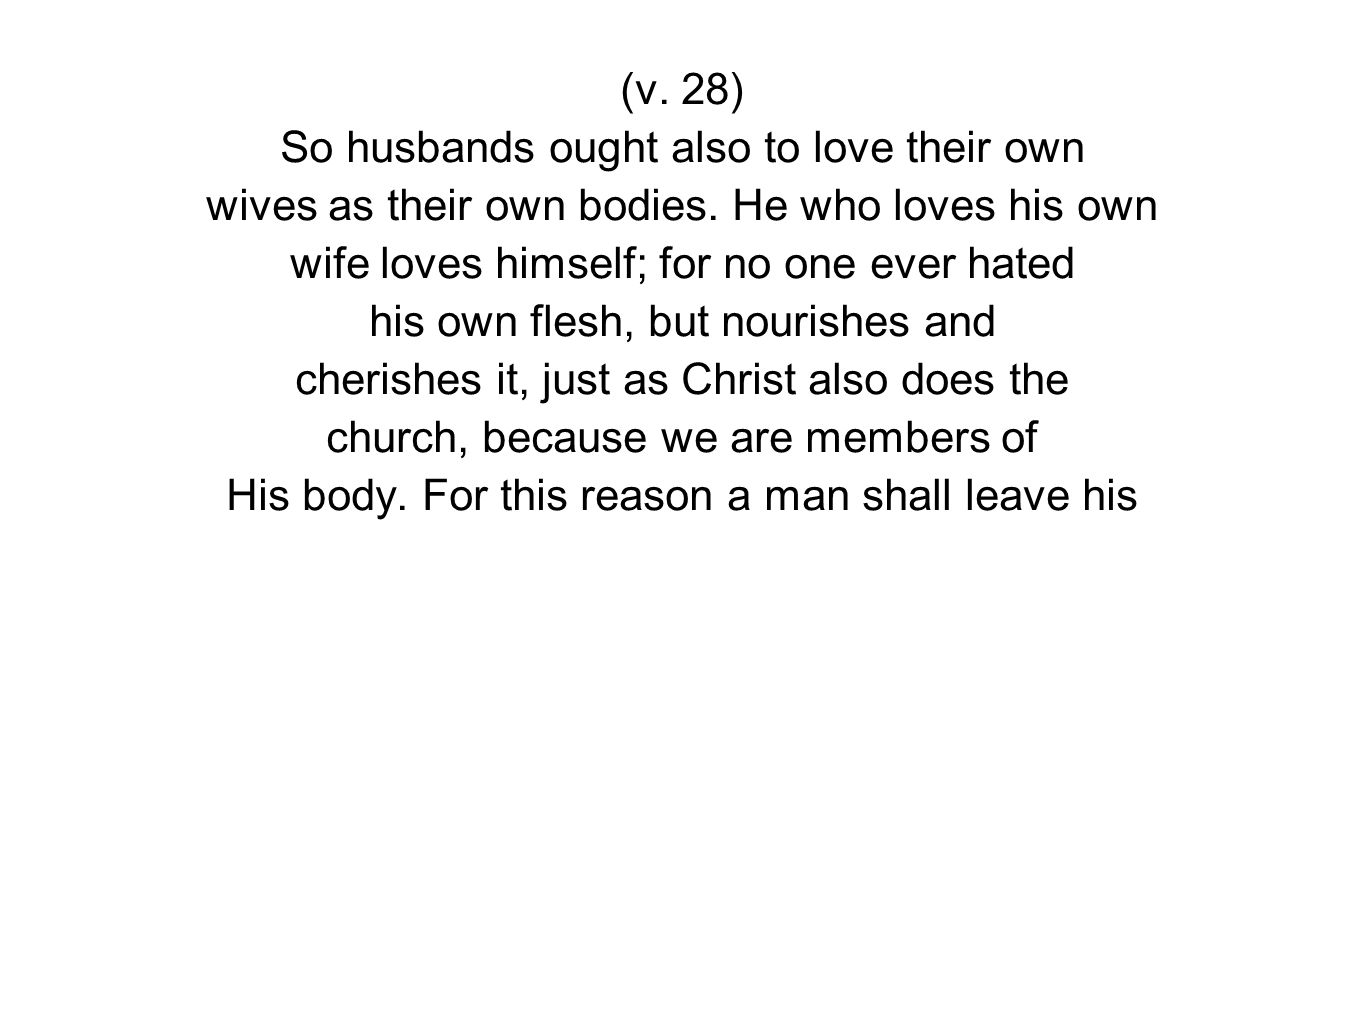 (v. 28) So husbands ought also to love their own wives as their own bodies.